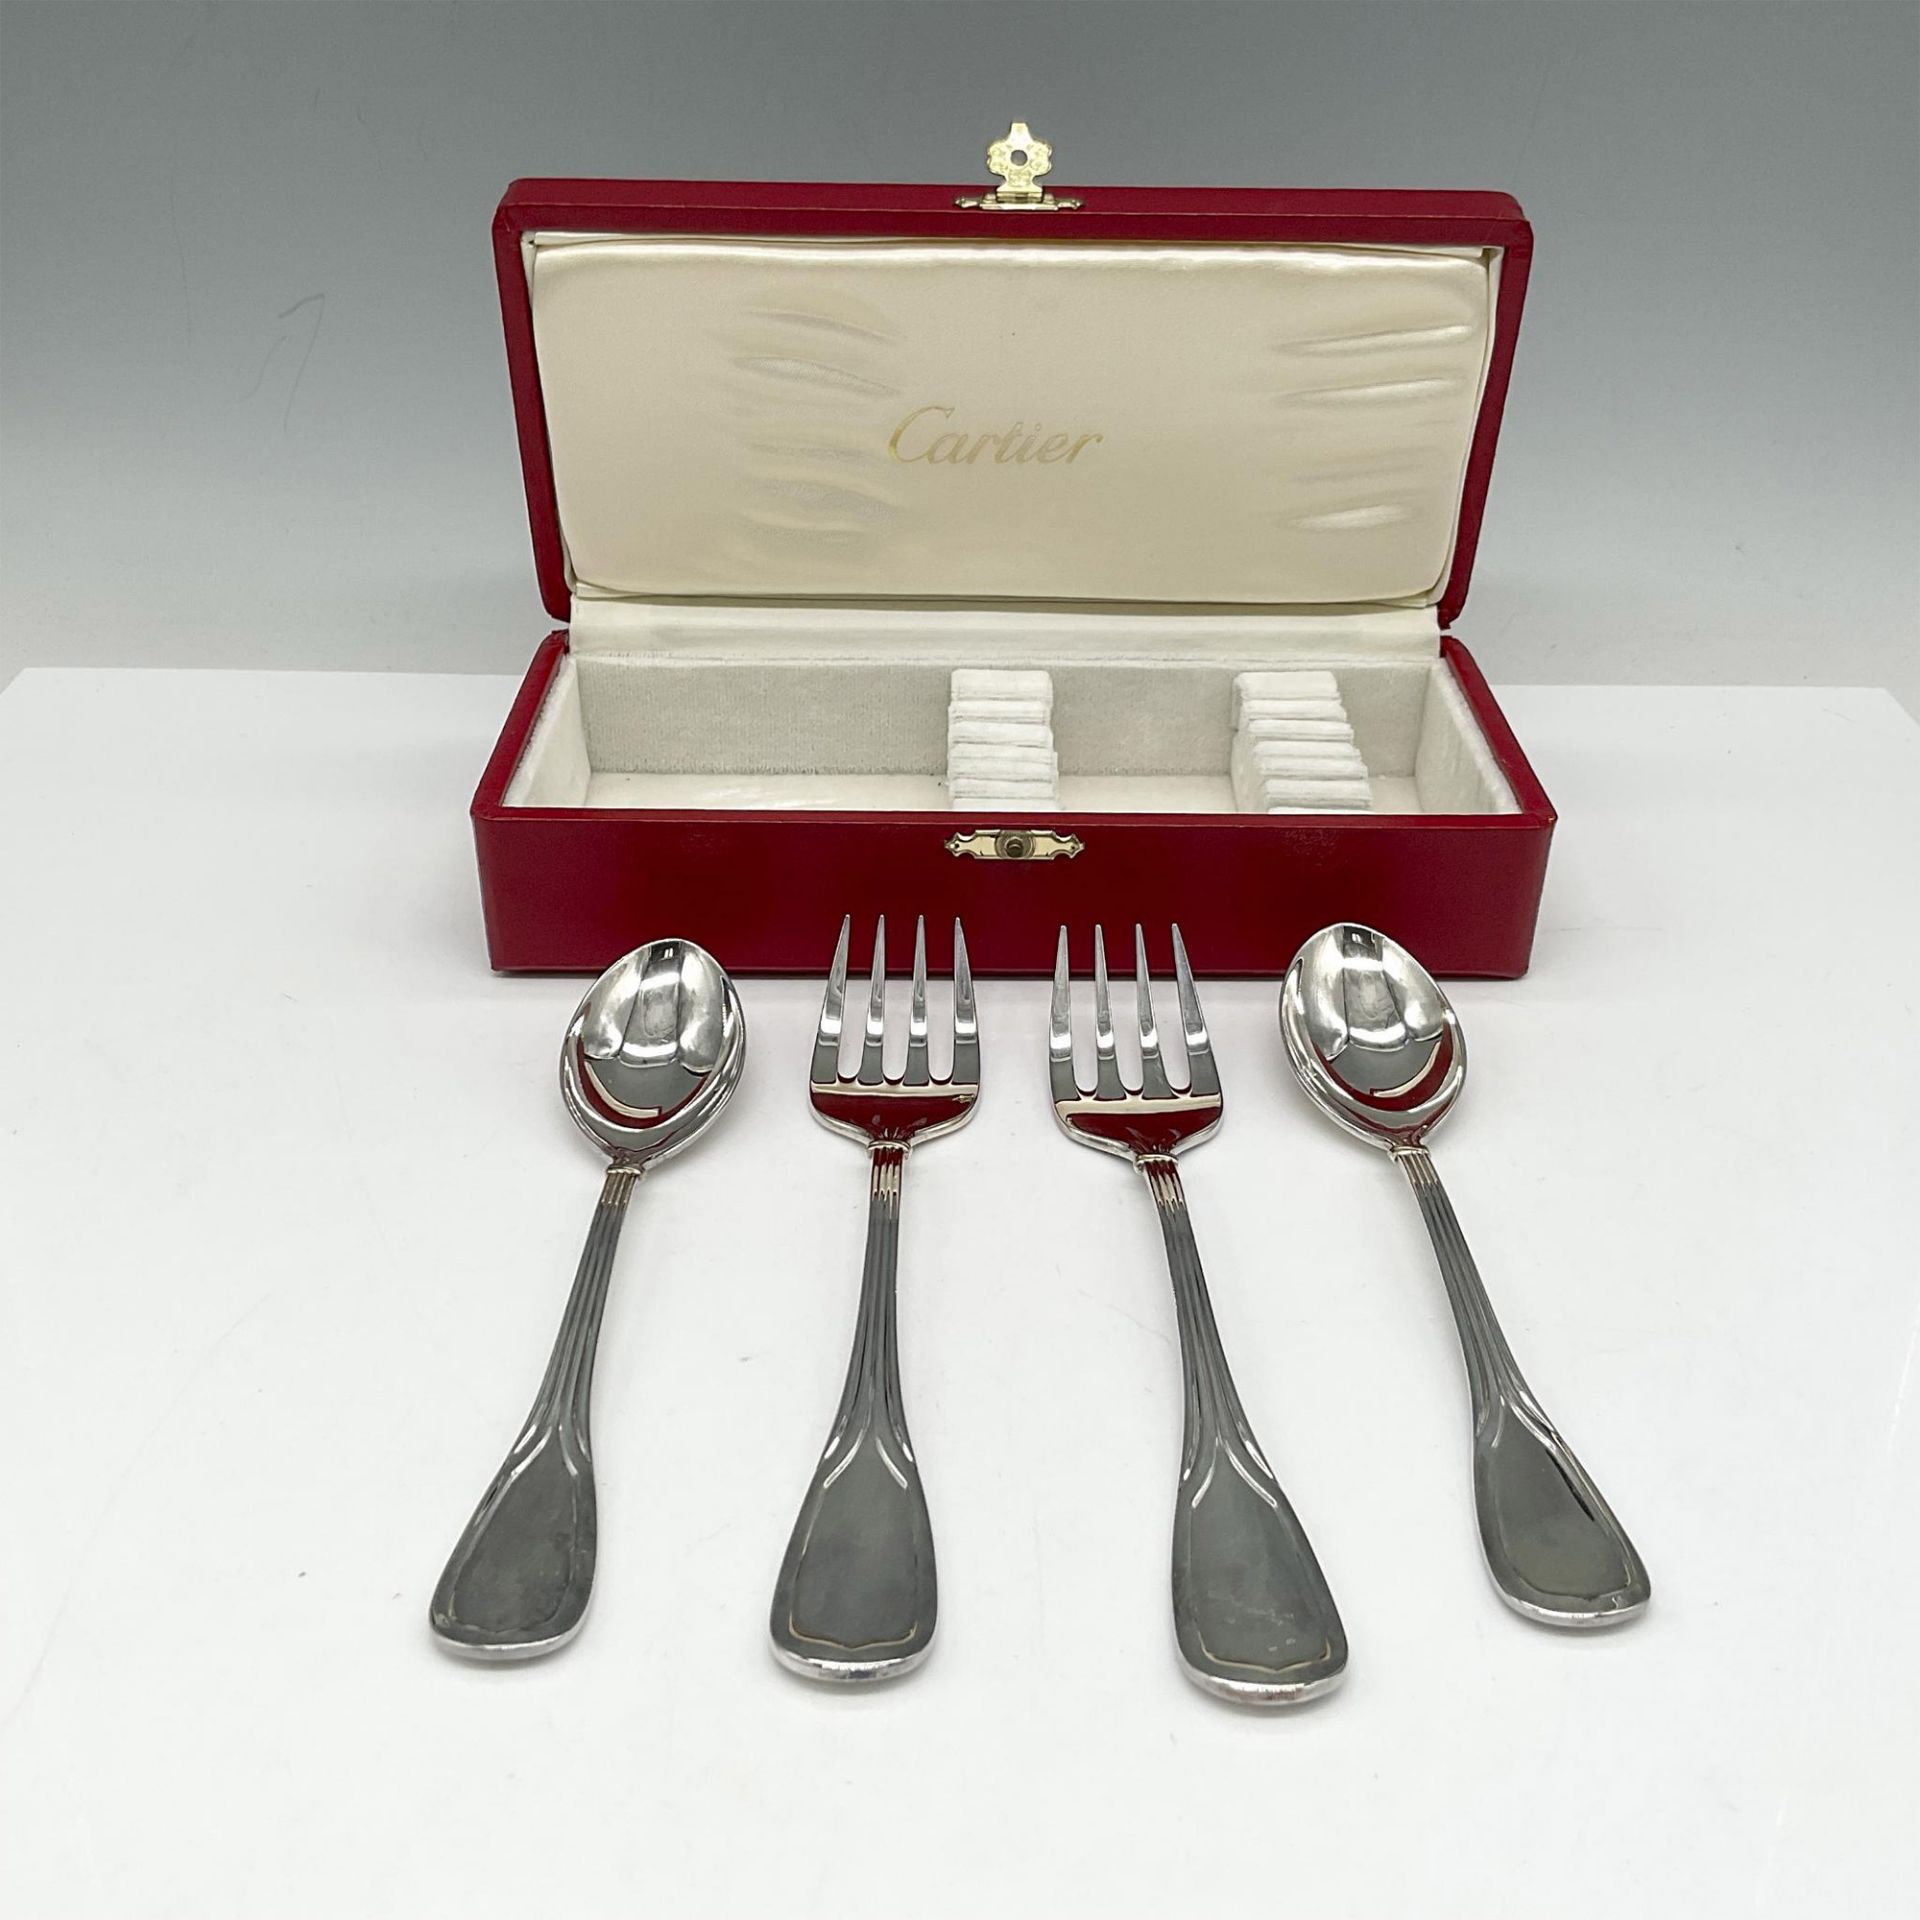 Cartier Sterling Silver Spoon and Fork Set, 4 pieces - Image 2 of 3